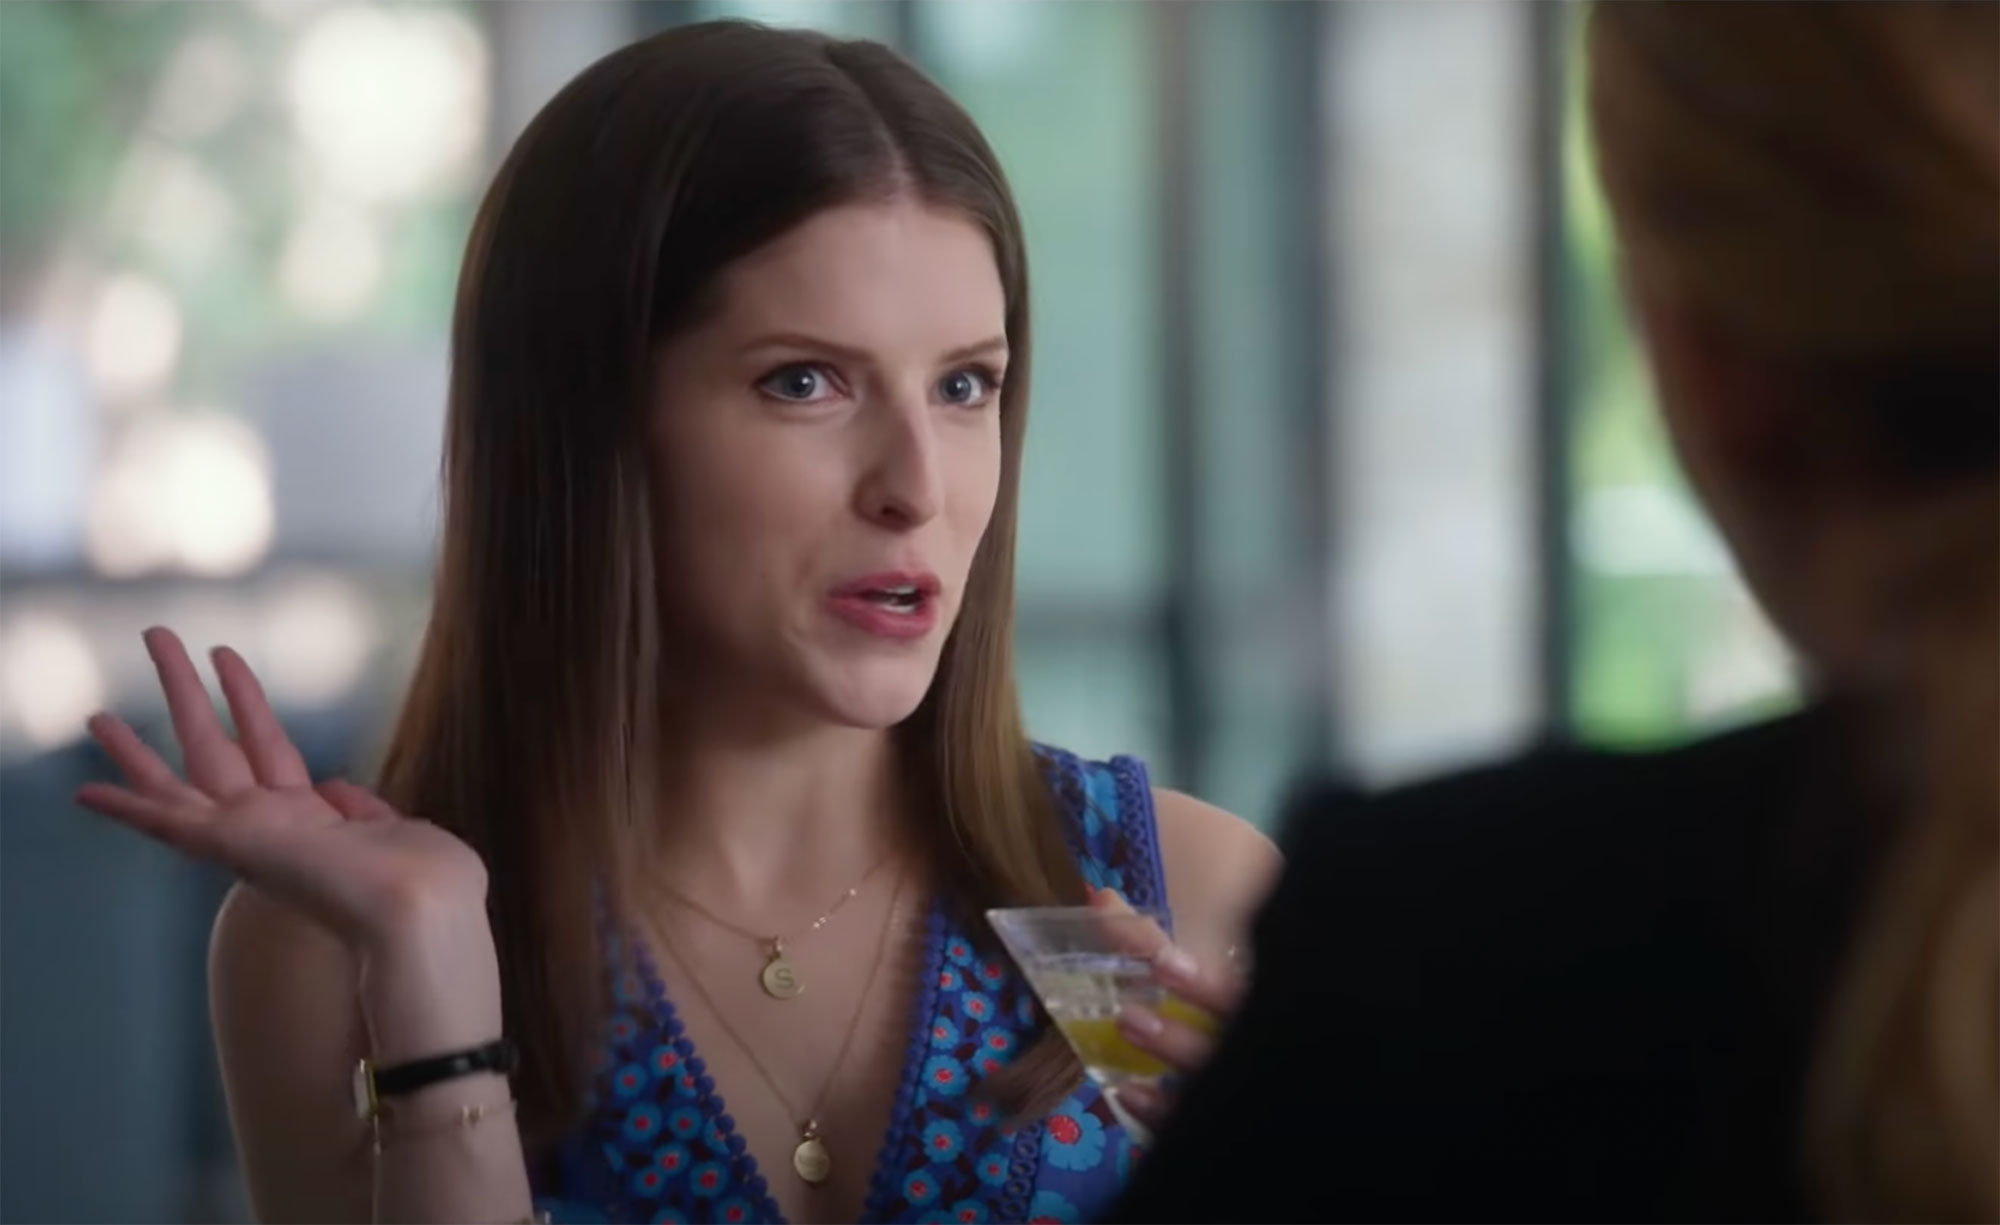 Blake Lively & Anna Kendrick Go Glam for 'A Simple Favor